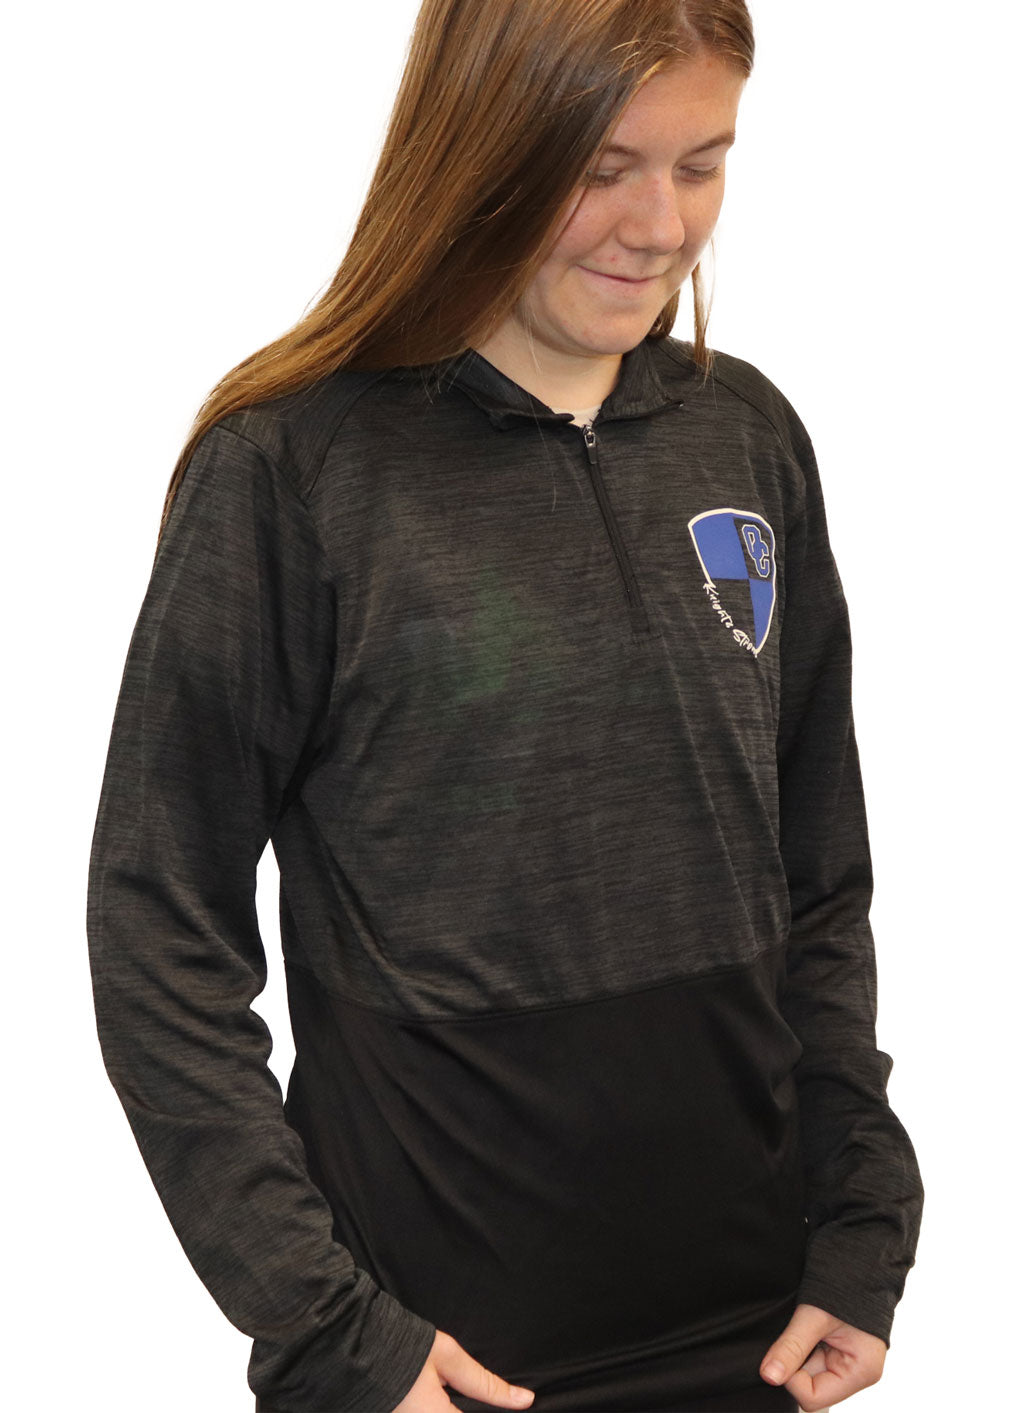 Black quarter zip pullover with OC Knights Strong Shield logo on left chest 